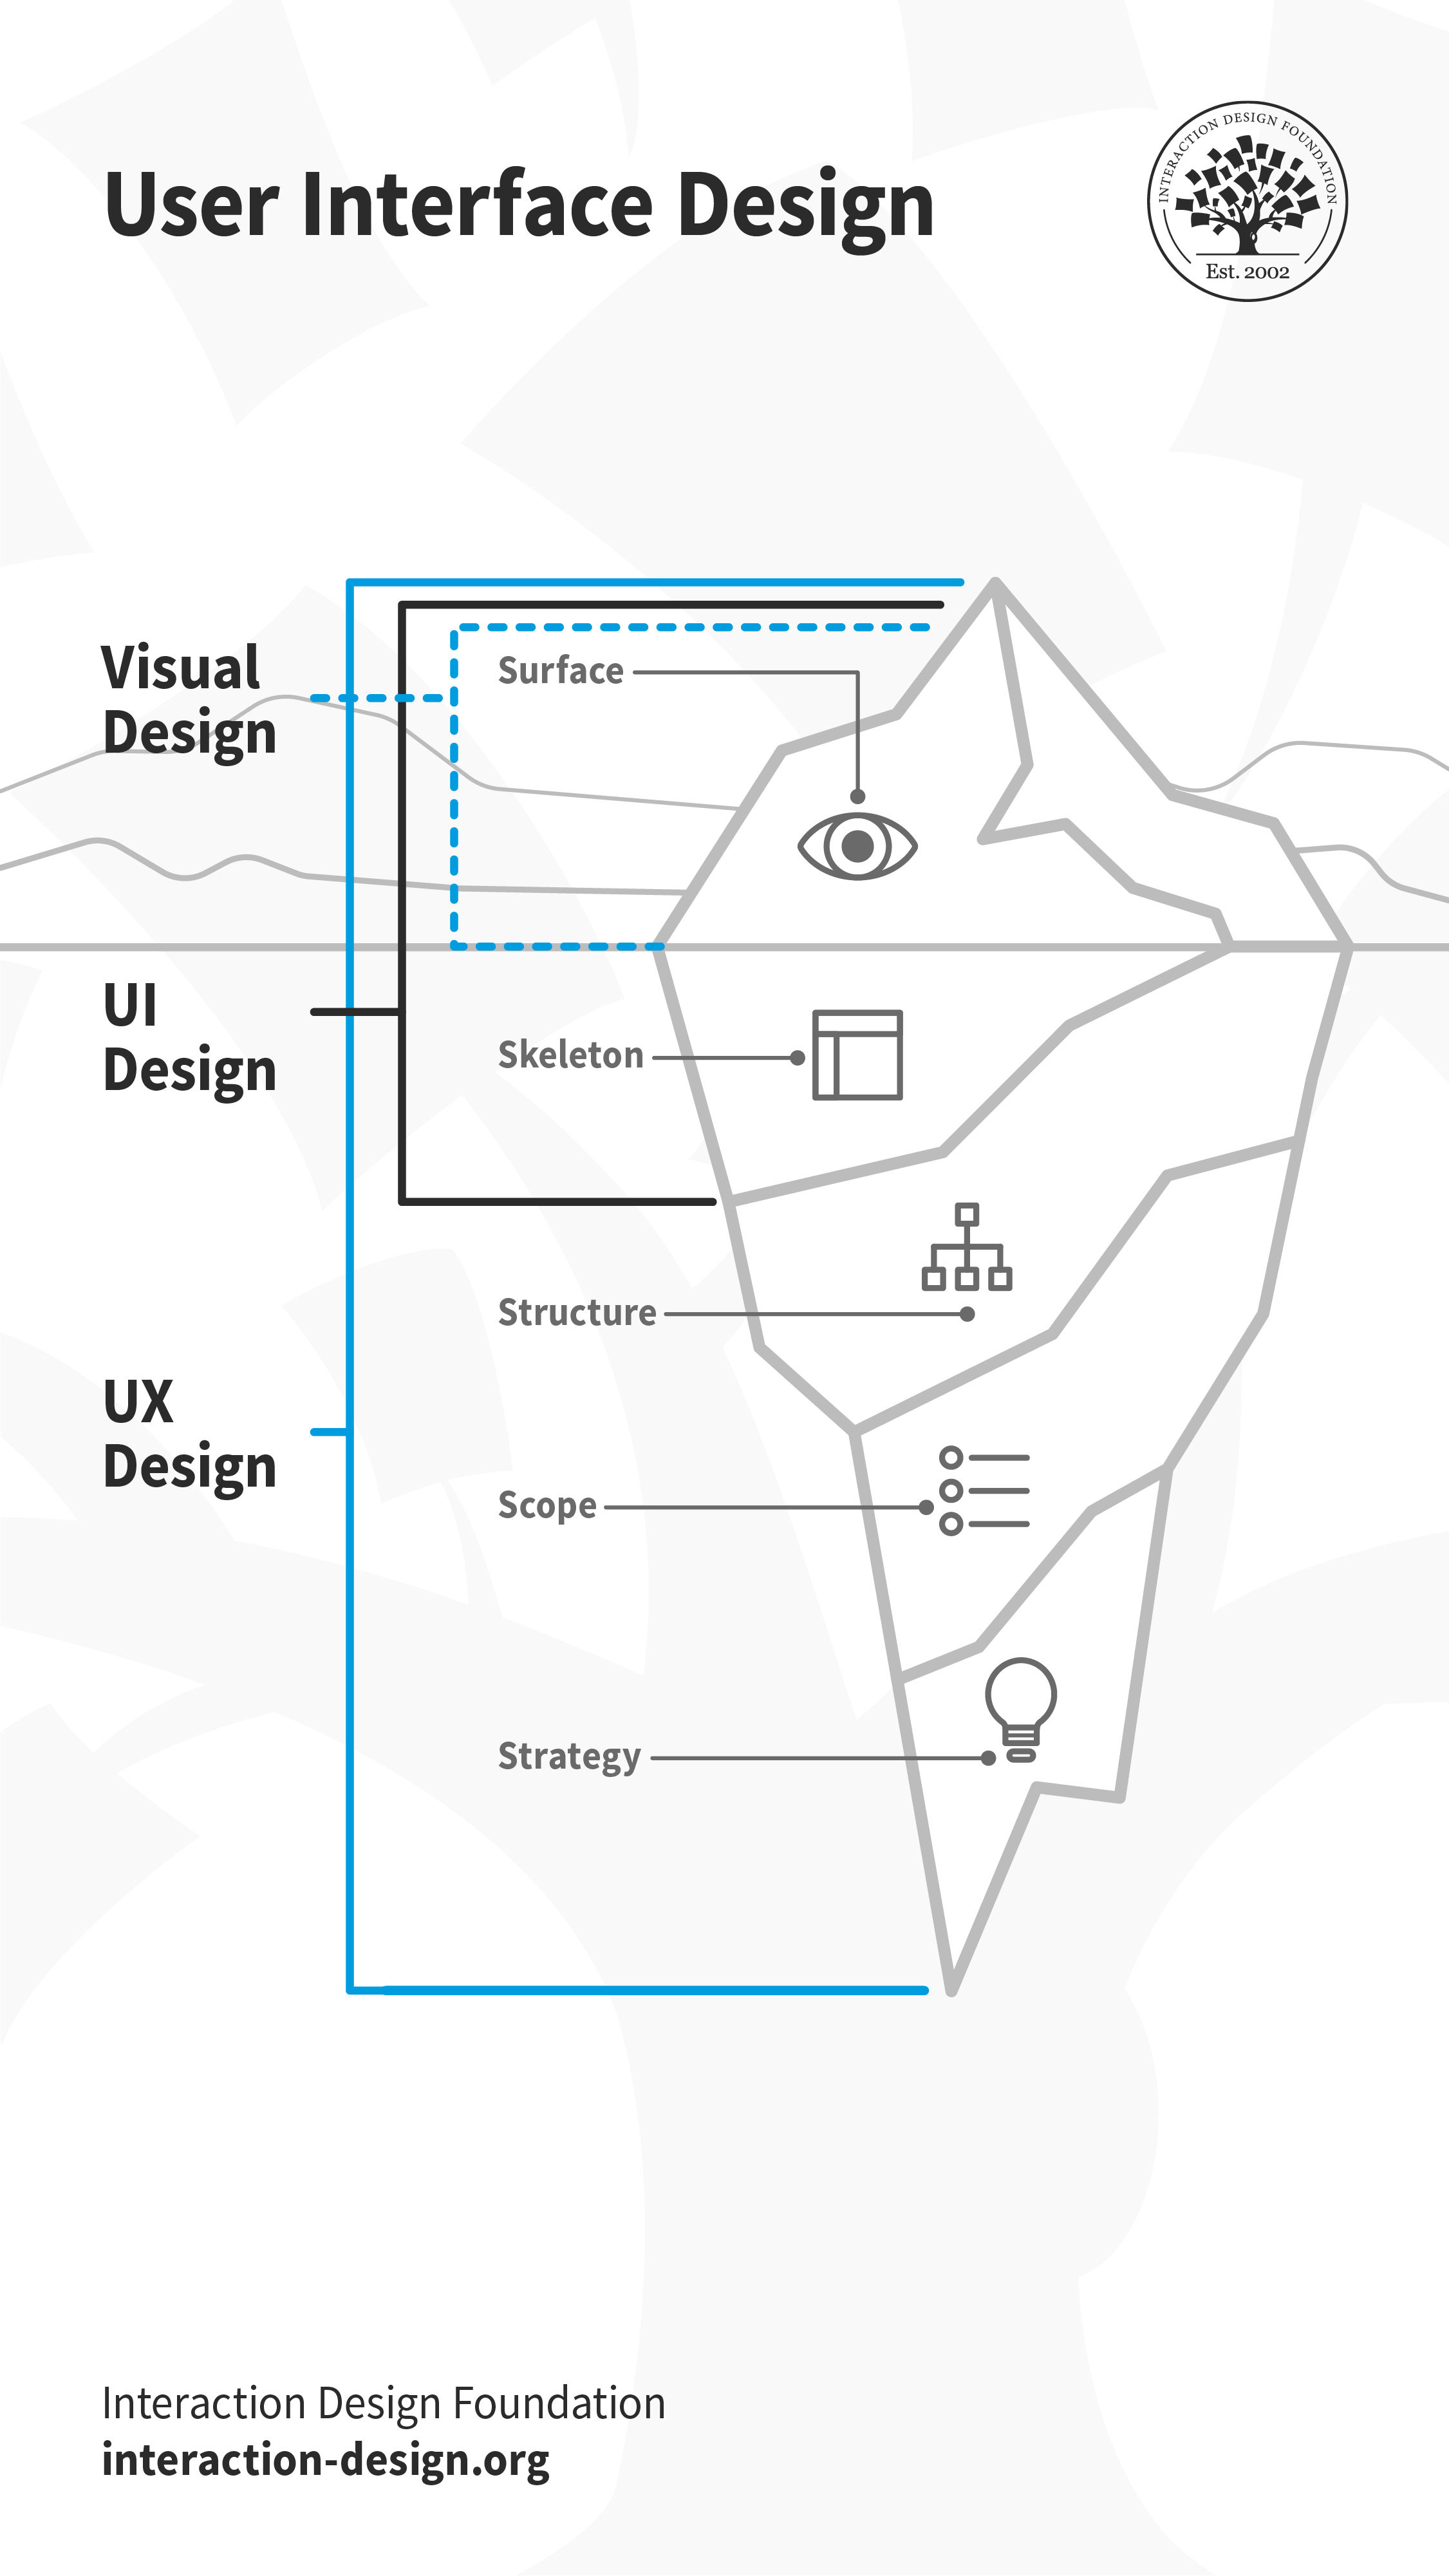 Illustration of an iceberg that depicts the various layers that make up user interface design and user experience design 